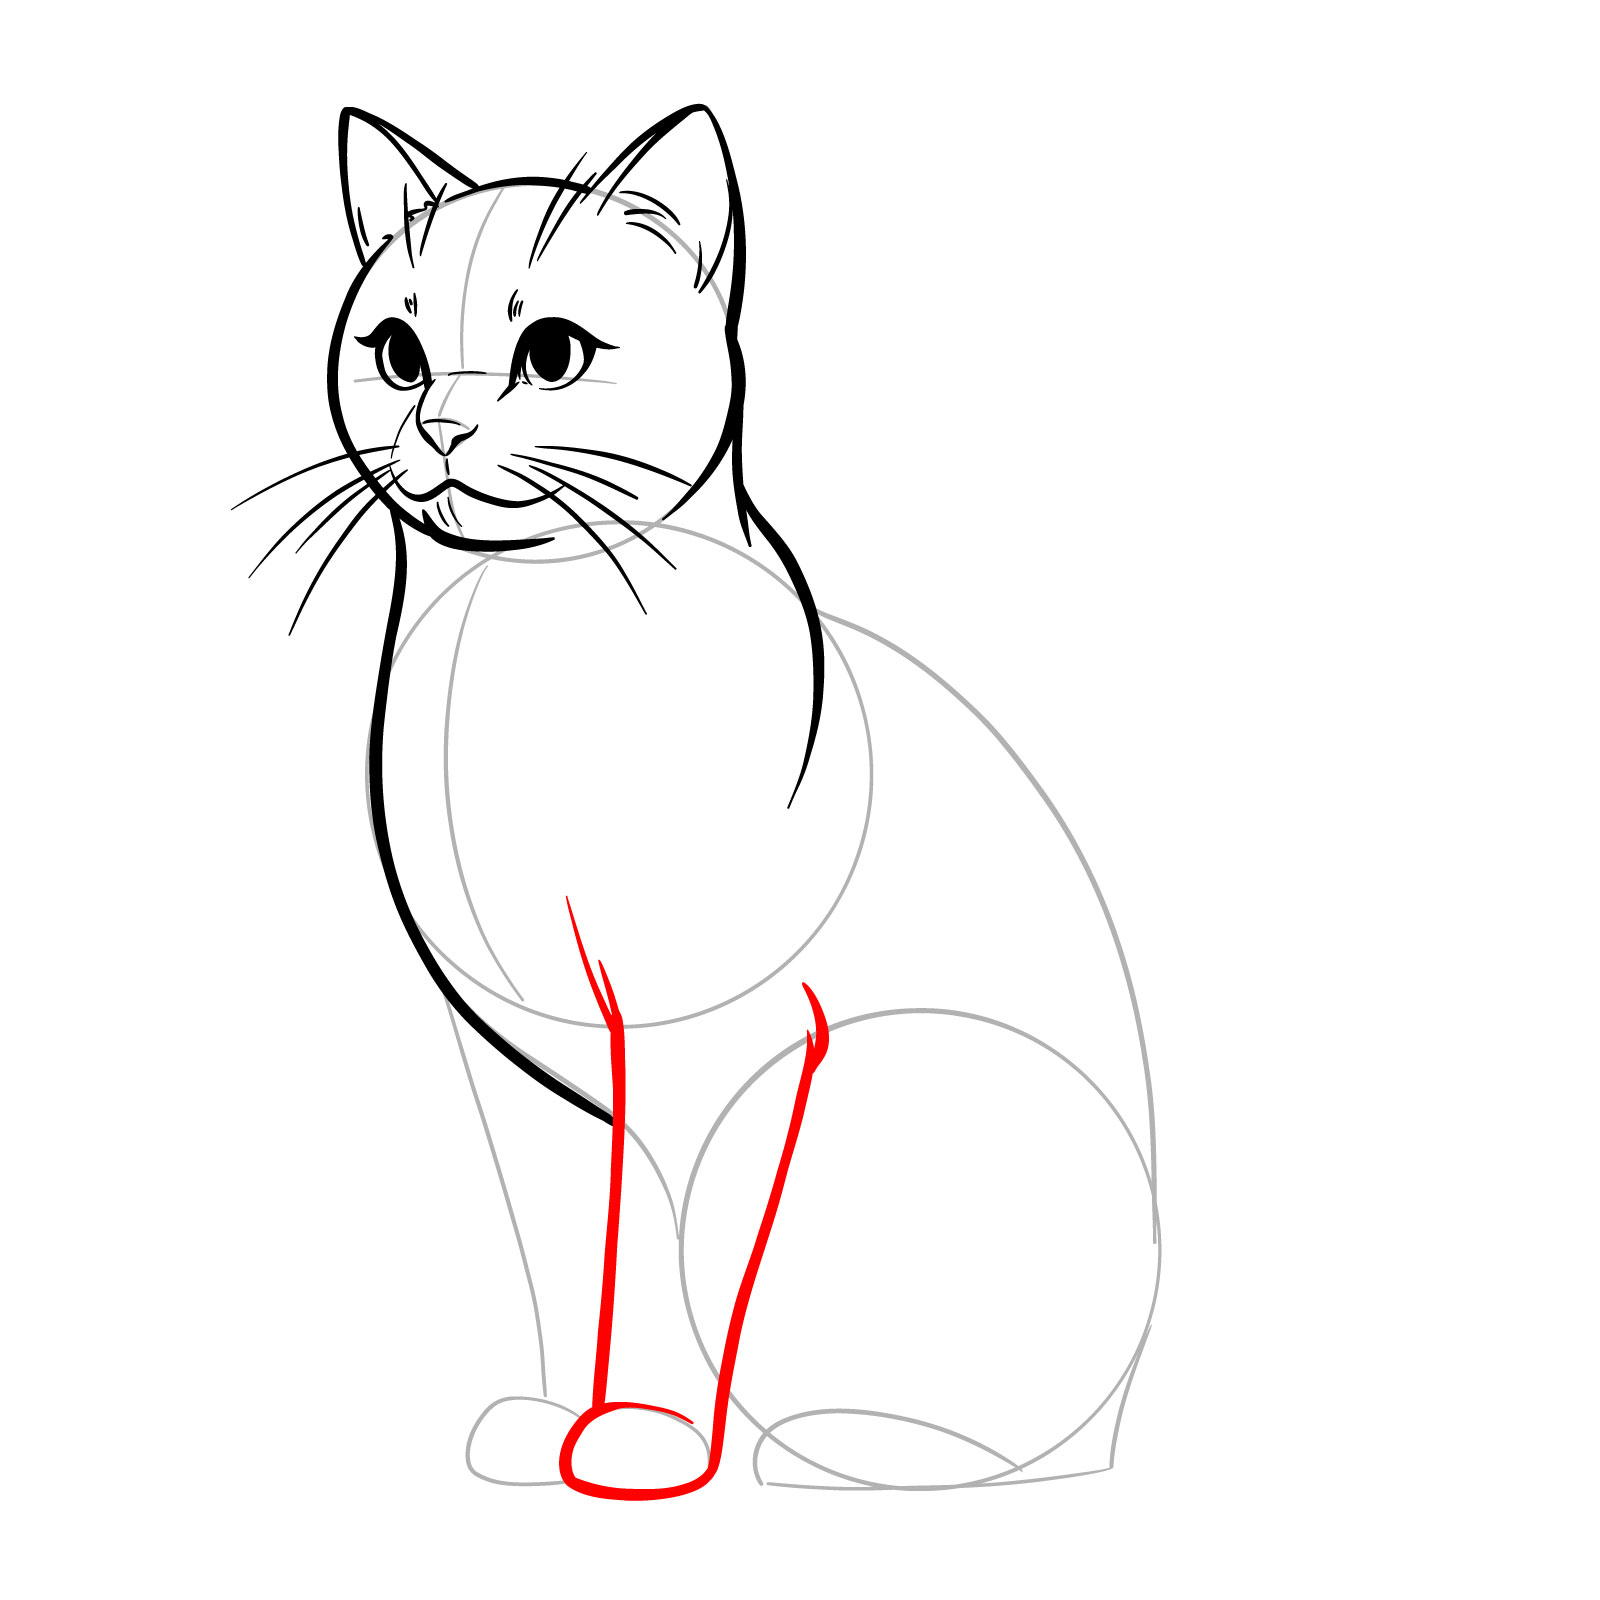 Sketch of a cat's front leg in a sitting position, illustrating the initial outlines and structure - step 09